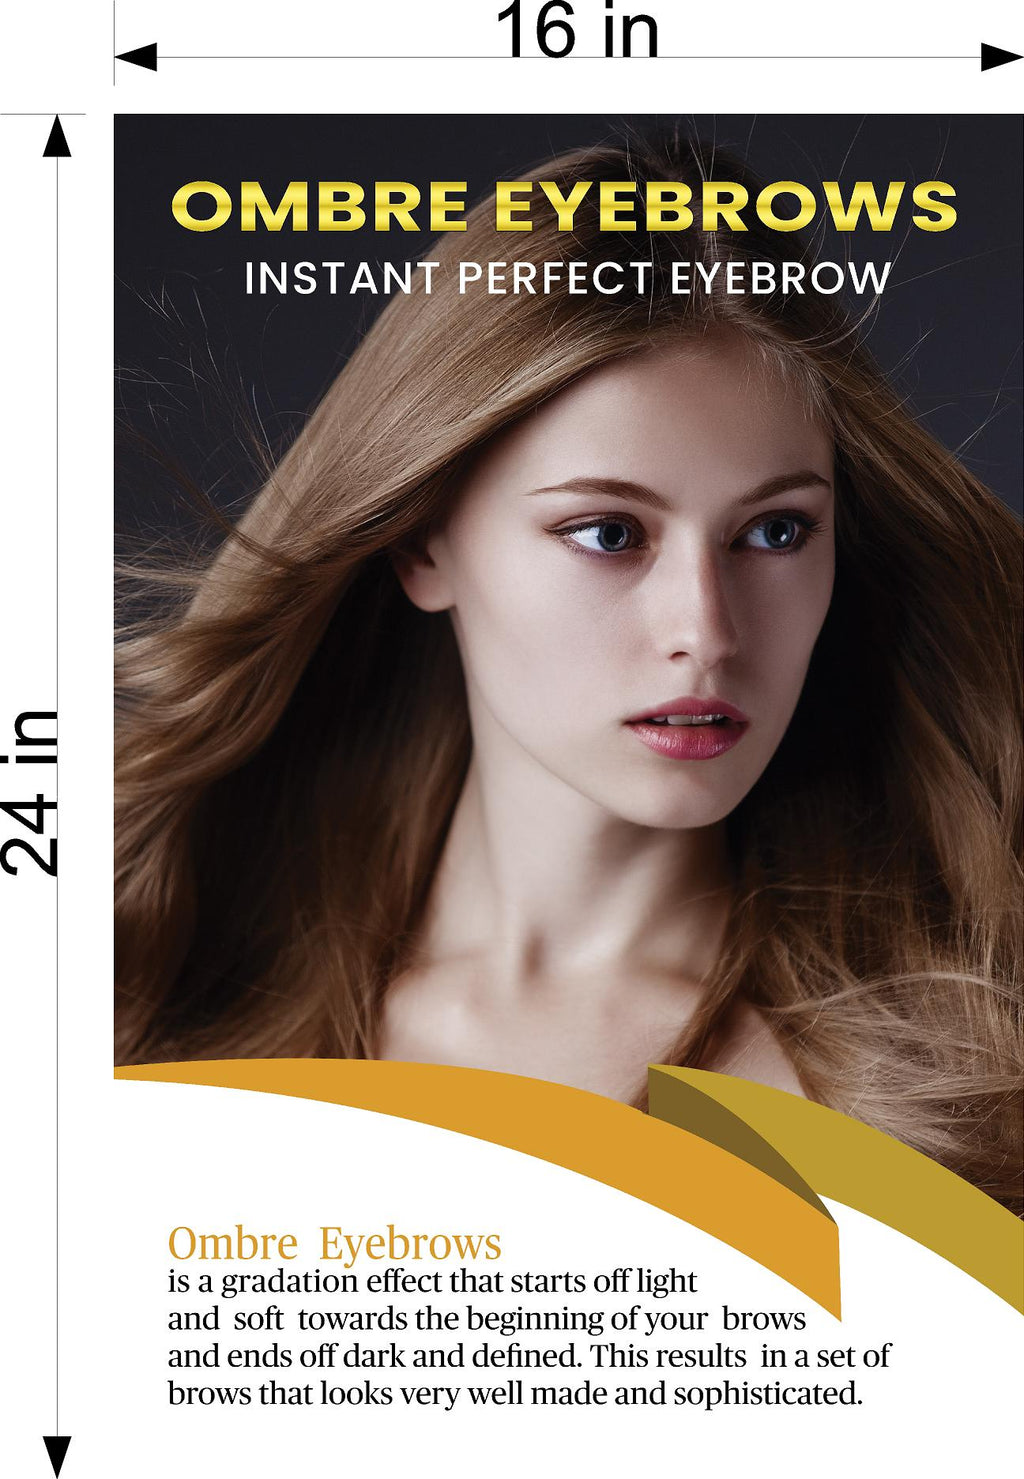 Ombre Eyebrows 05 Photo-Realistic Paper Poster Premium Interior Inside Sign Advertising Marketing Wall Window Non-Laminated Vertical